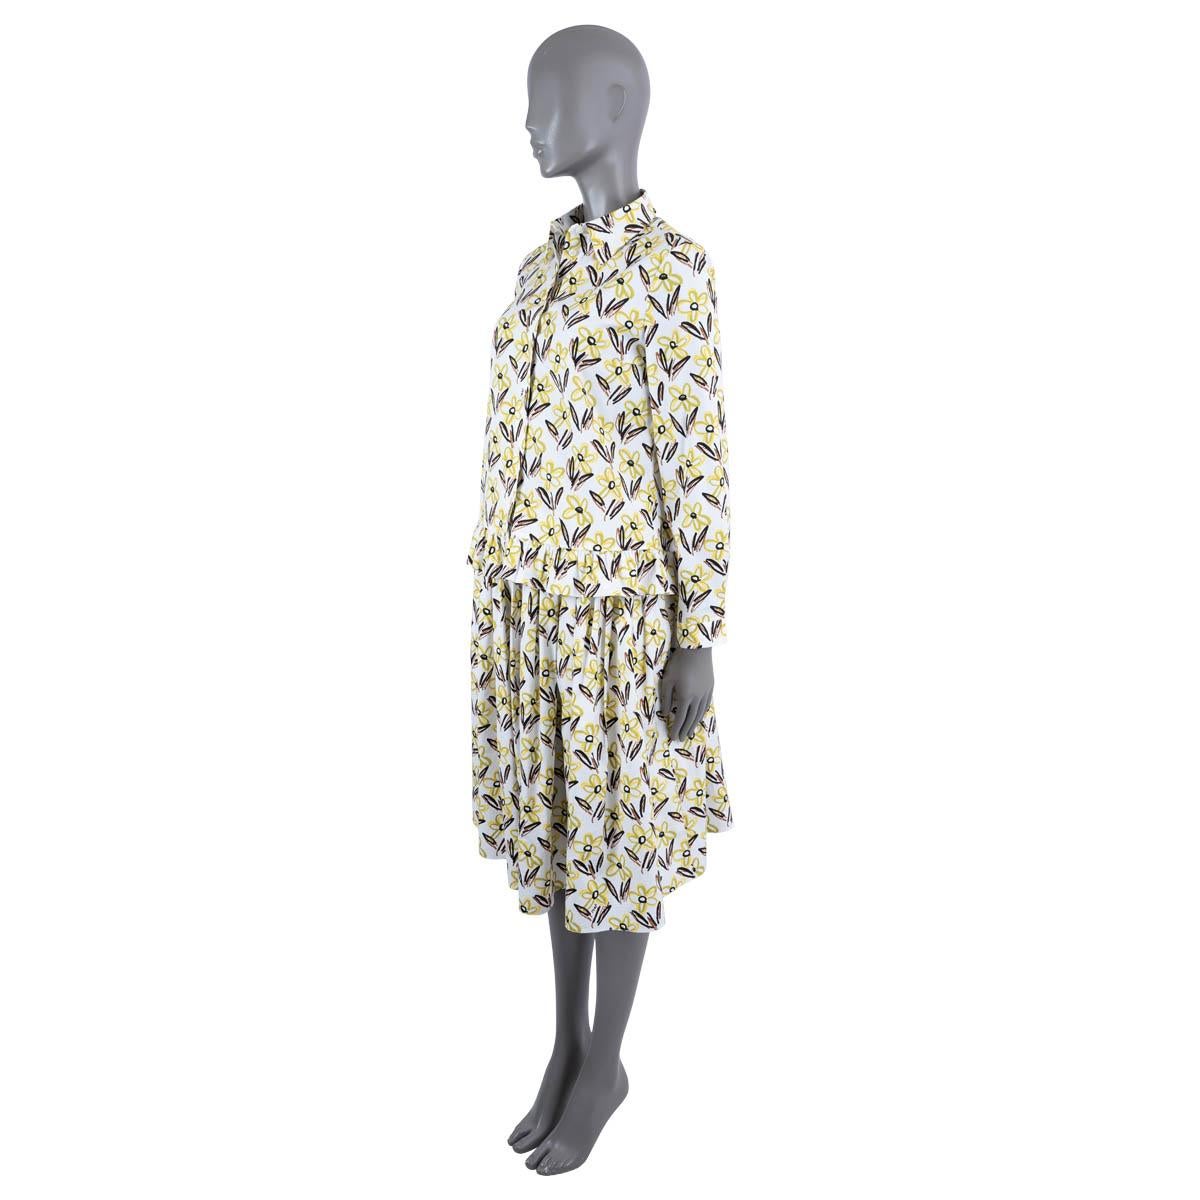 100% authentic Prada floral print skirt outfit in white, lime, yellow, brown and black cotton (94%) and elastane (6%) with a straight collar. Features ruffled hem. Closes with buttons on the front and button cuffs. Comes whit a matching pleated